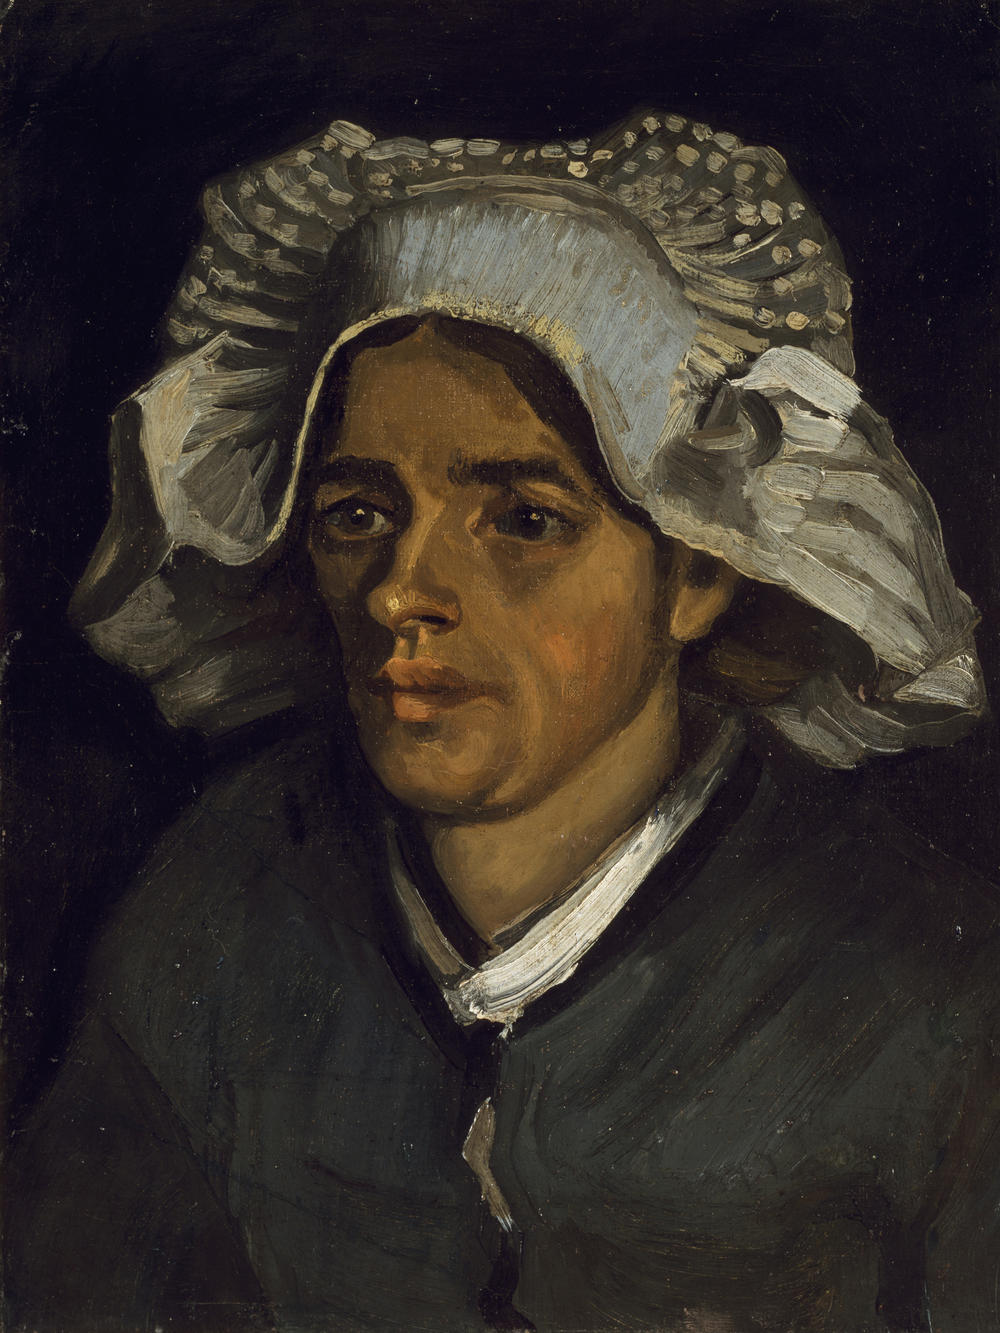 <em></em>Van Gogh's <em>Head of a Peasant Woman </em>is one of three pieces of the artist's work in the National Galleries Collection. With the discovery of the hidden self-portrait, they now have four works in total.